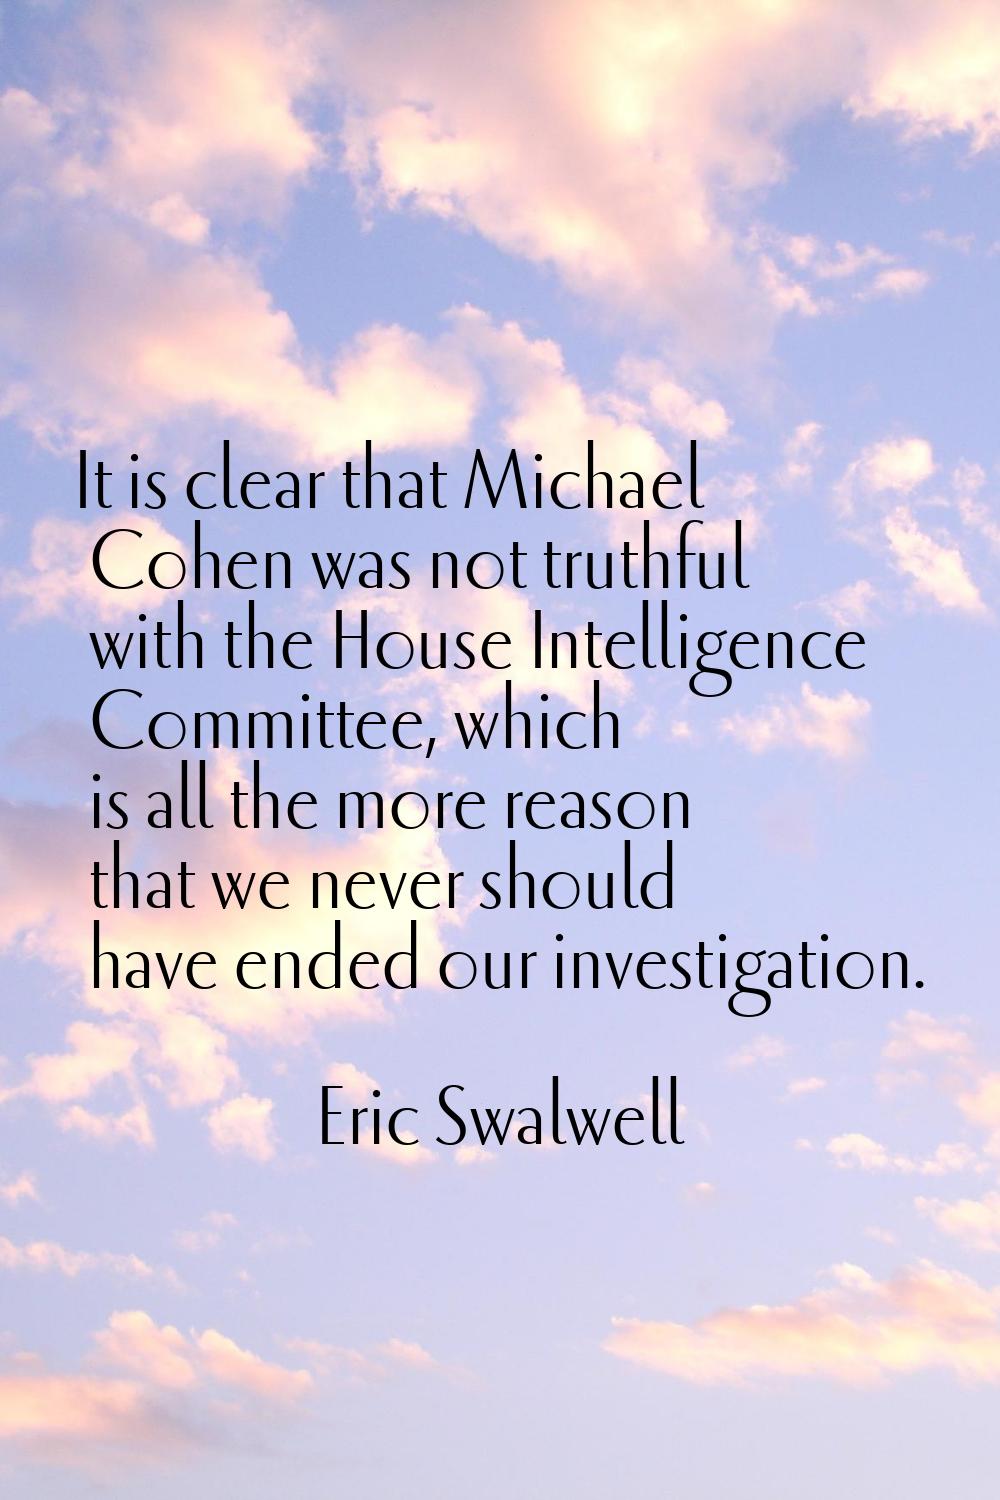 It is clear that Michael Cohen was not truthful with the House Intelligence Committee, which is all